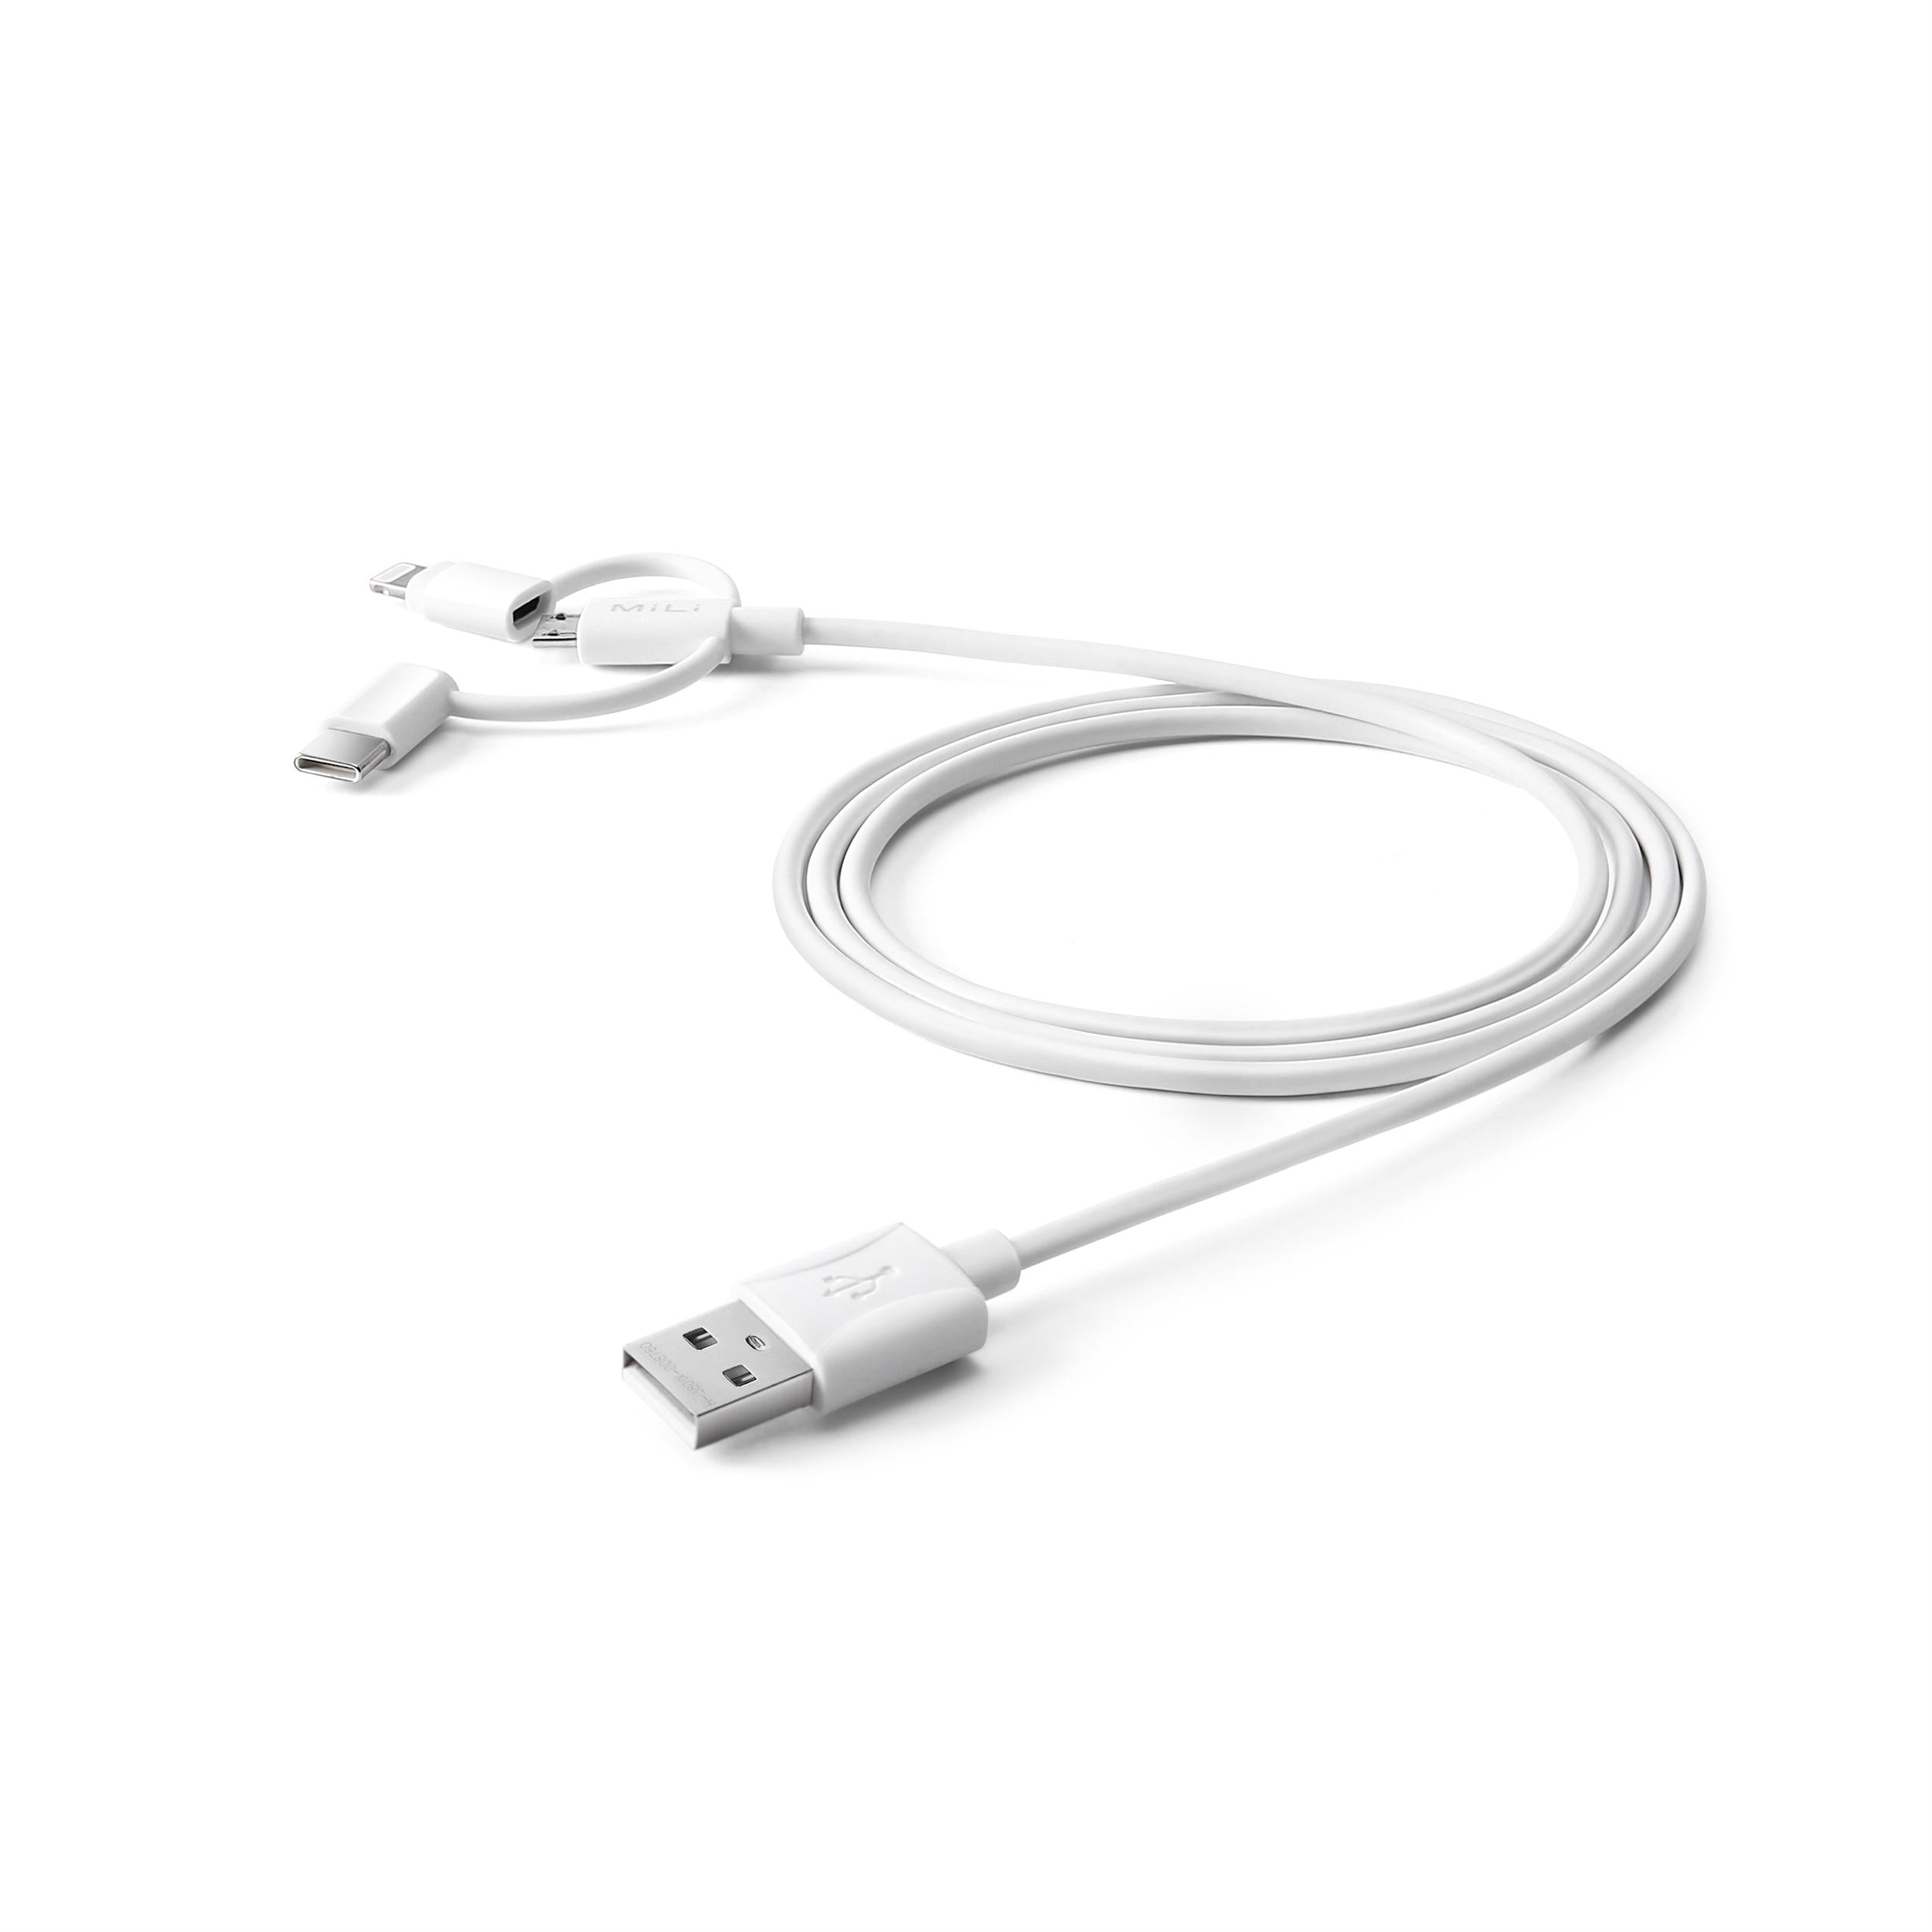 MiLi 3 In 1 Cable